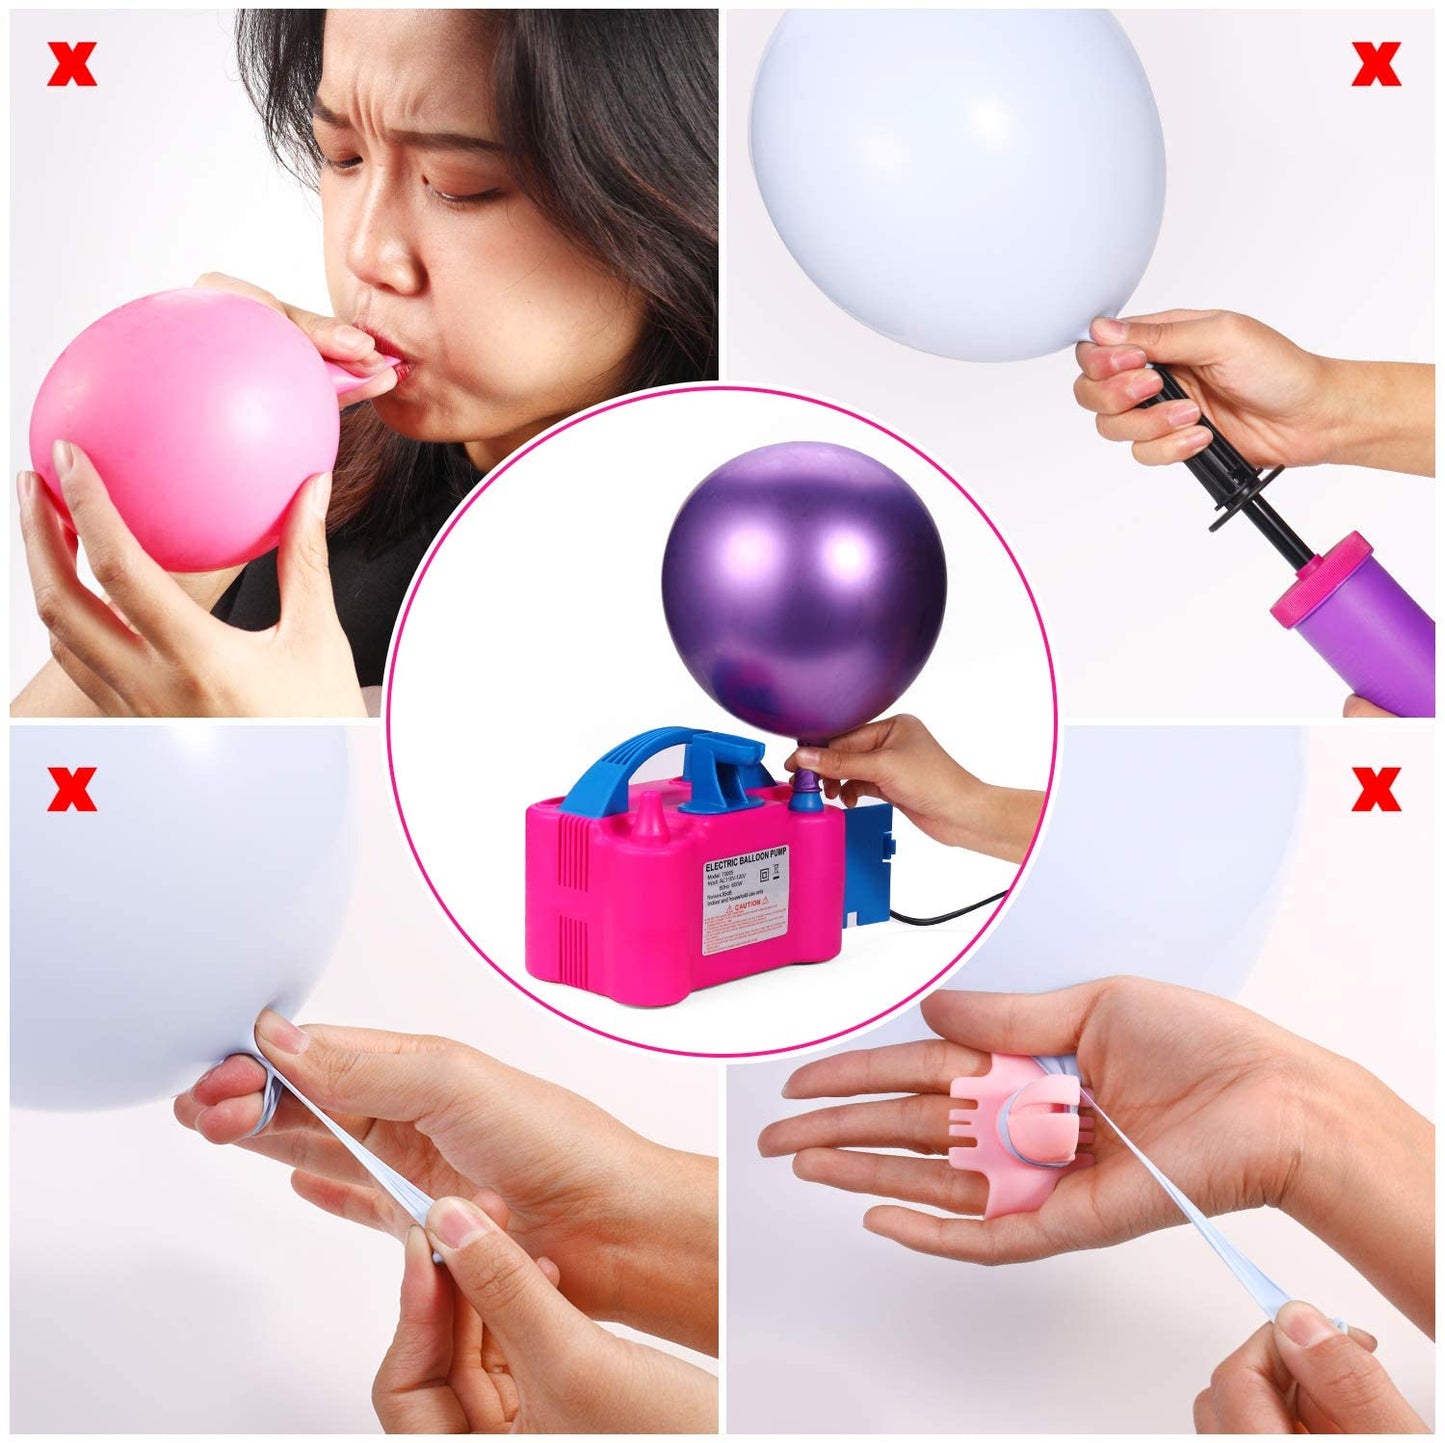  Electric Air Balloon Pump and Balloon Tying Tool in One